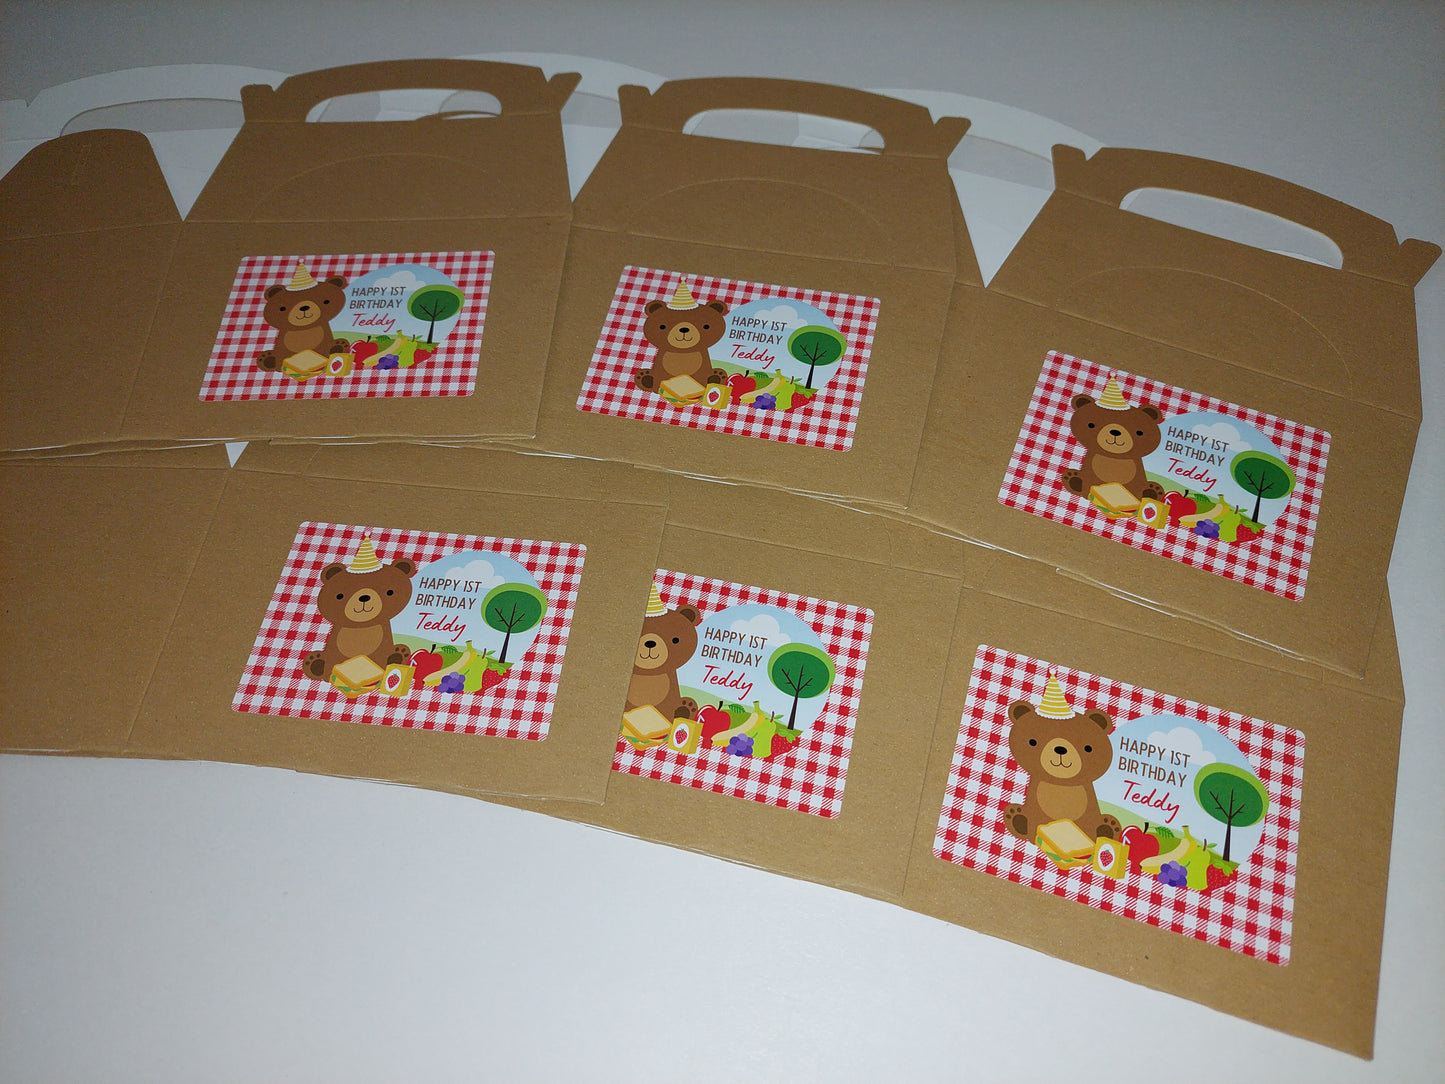 Party Boxes | Teddy Bear Picnic Party Boxes | Teddy Bear Picnic Party | Teddy Bear Party Decor | Party Bags